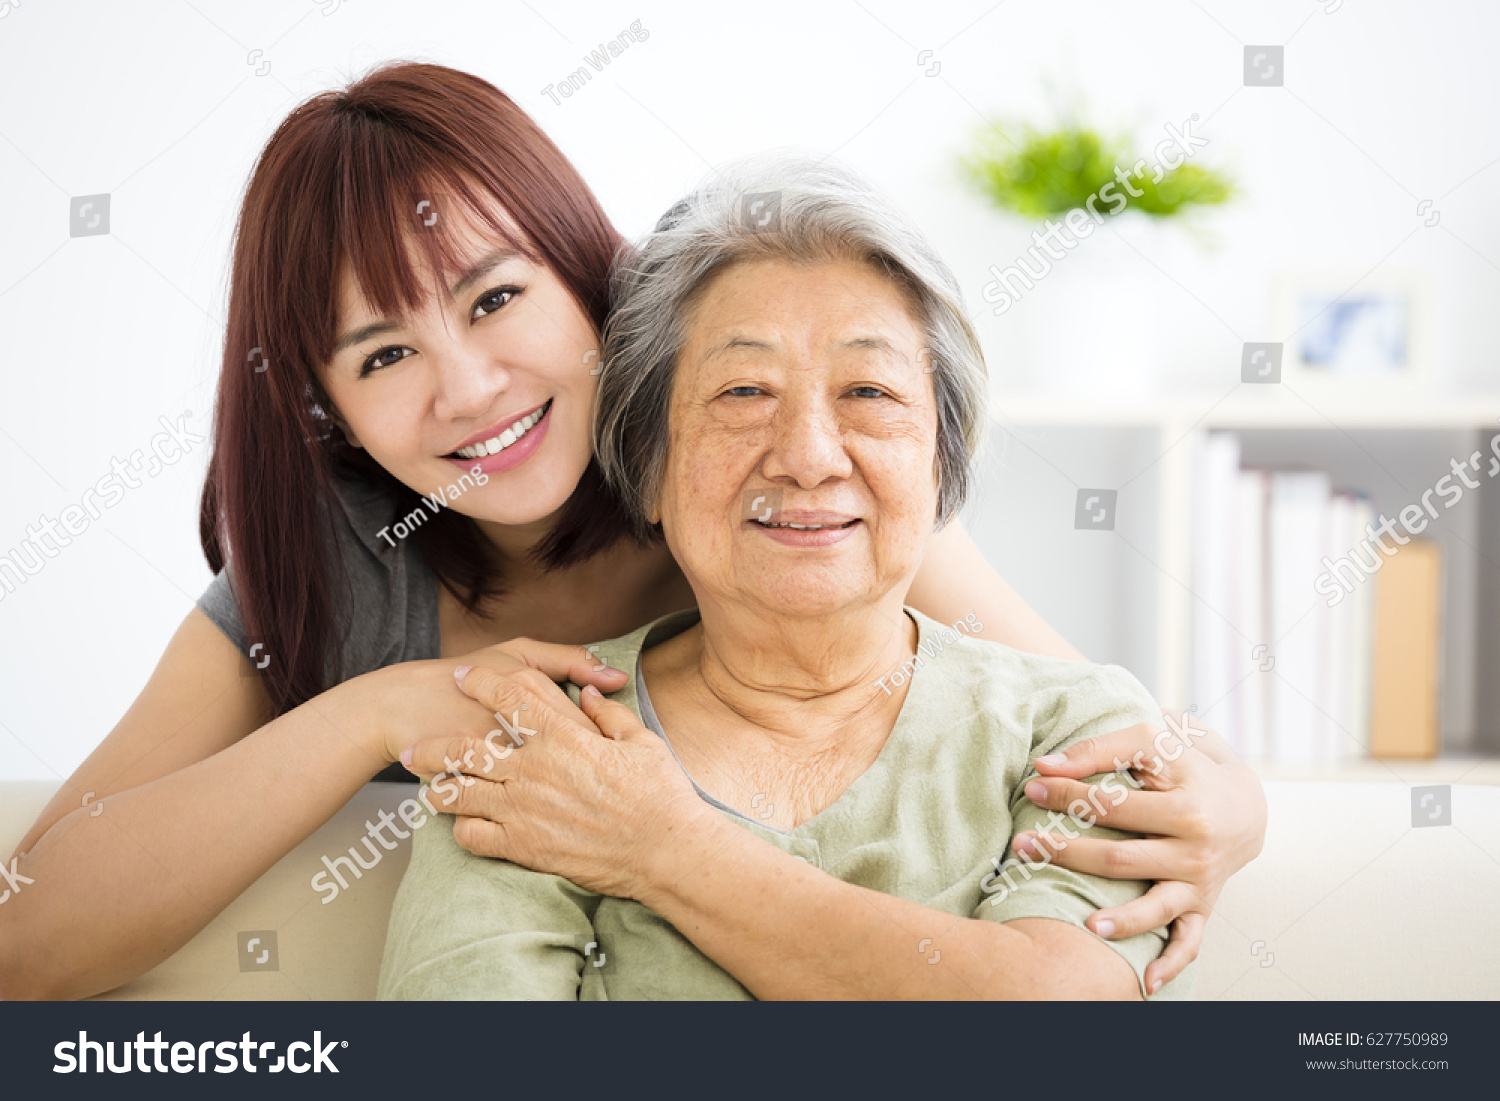 Grandmother and granddaughter. Young woman carefully takes care of old woman #627750989